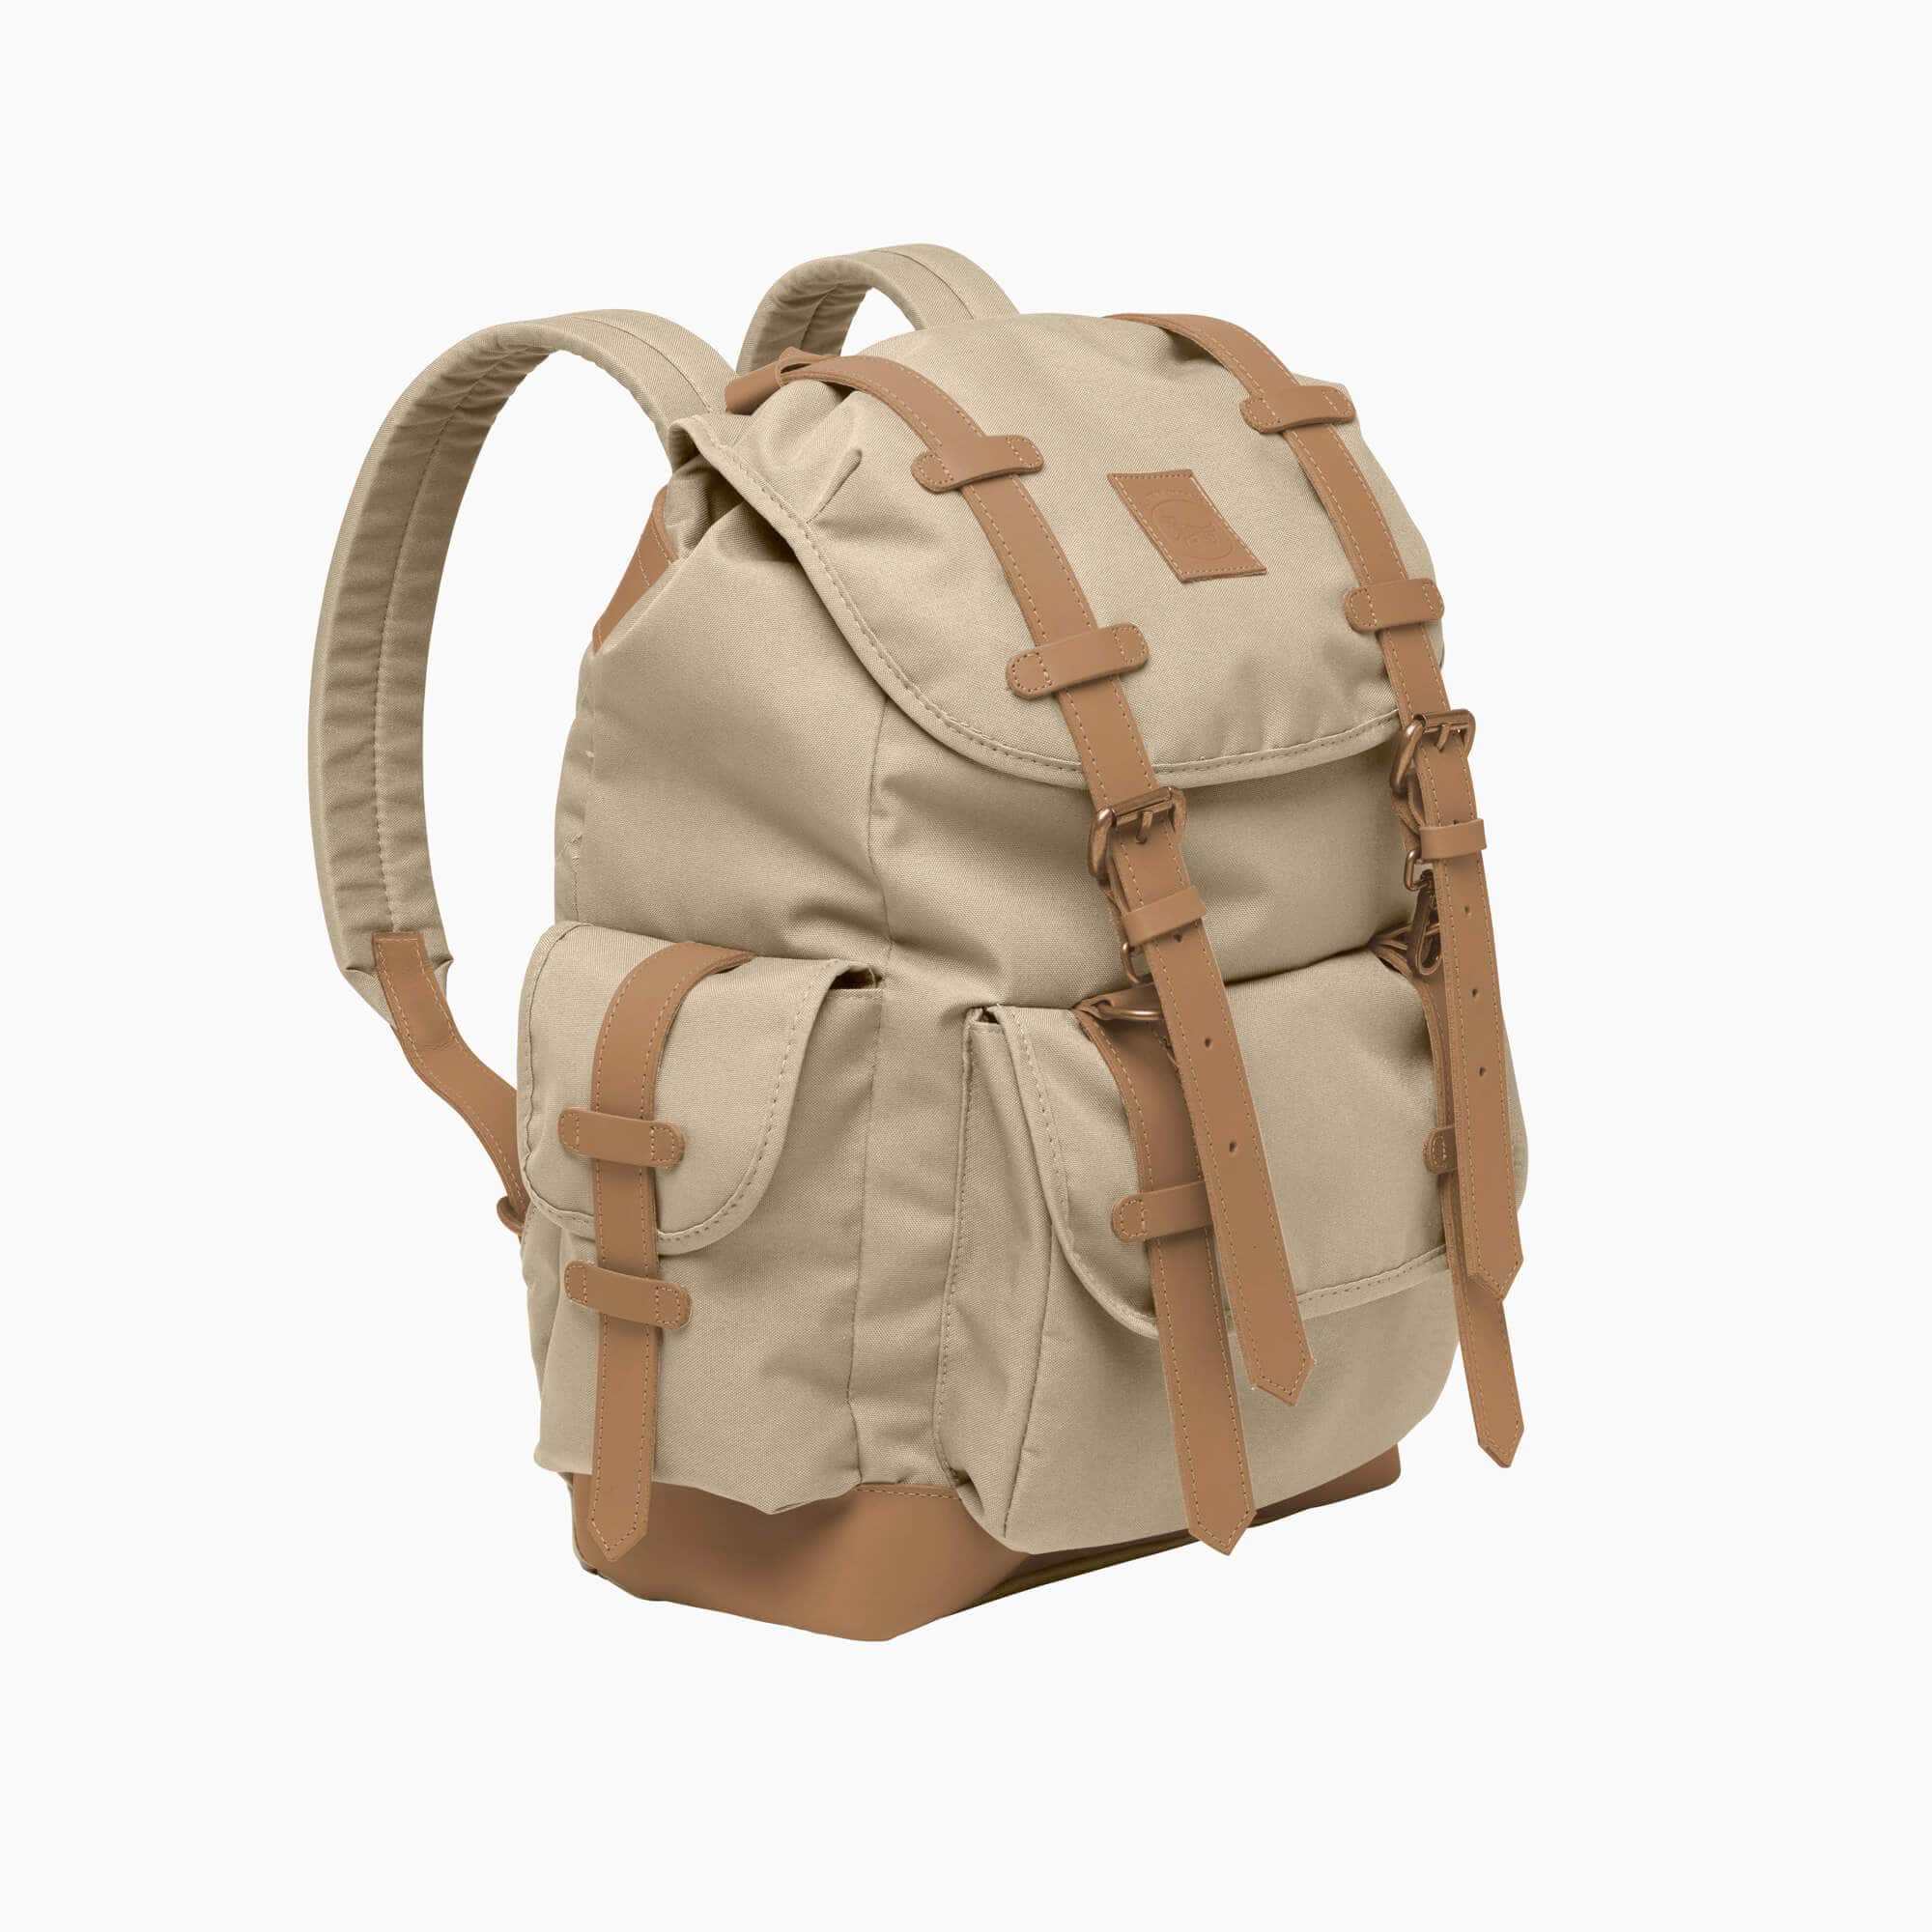 Beatnik & Sons Leather backpacks the Henry Colors backpack